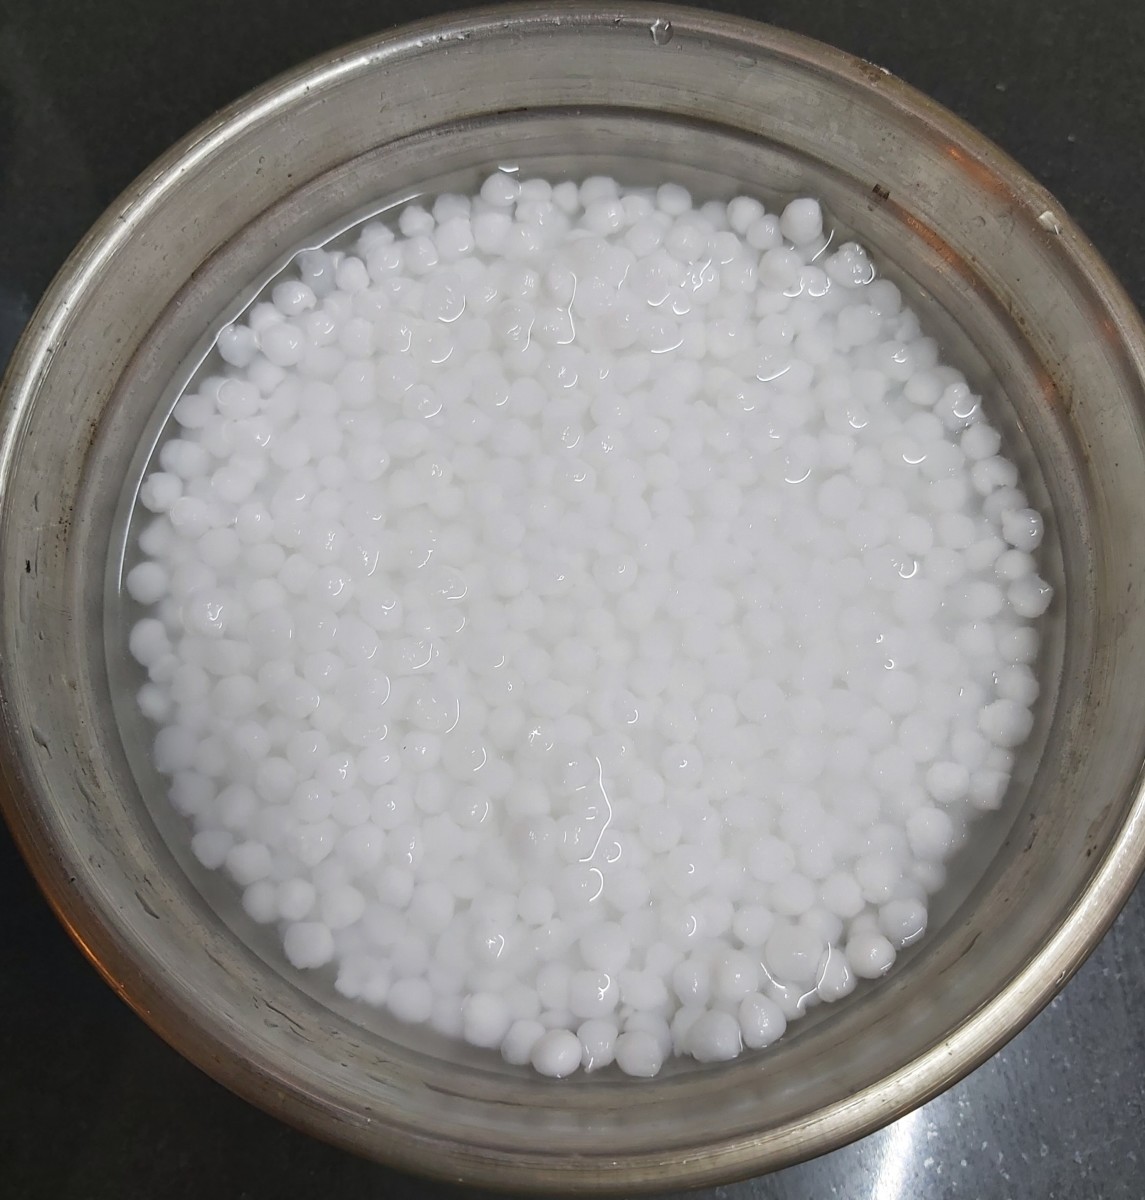 After soaking time, you can see sabudana gets doubled in volume by absorbing water.